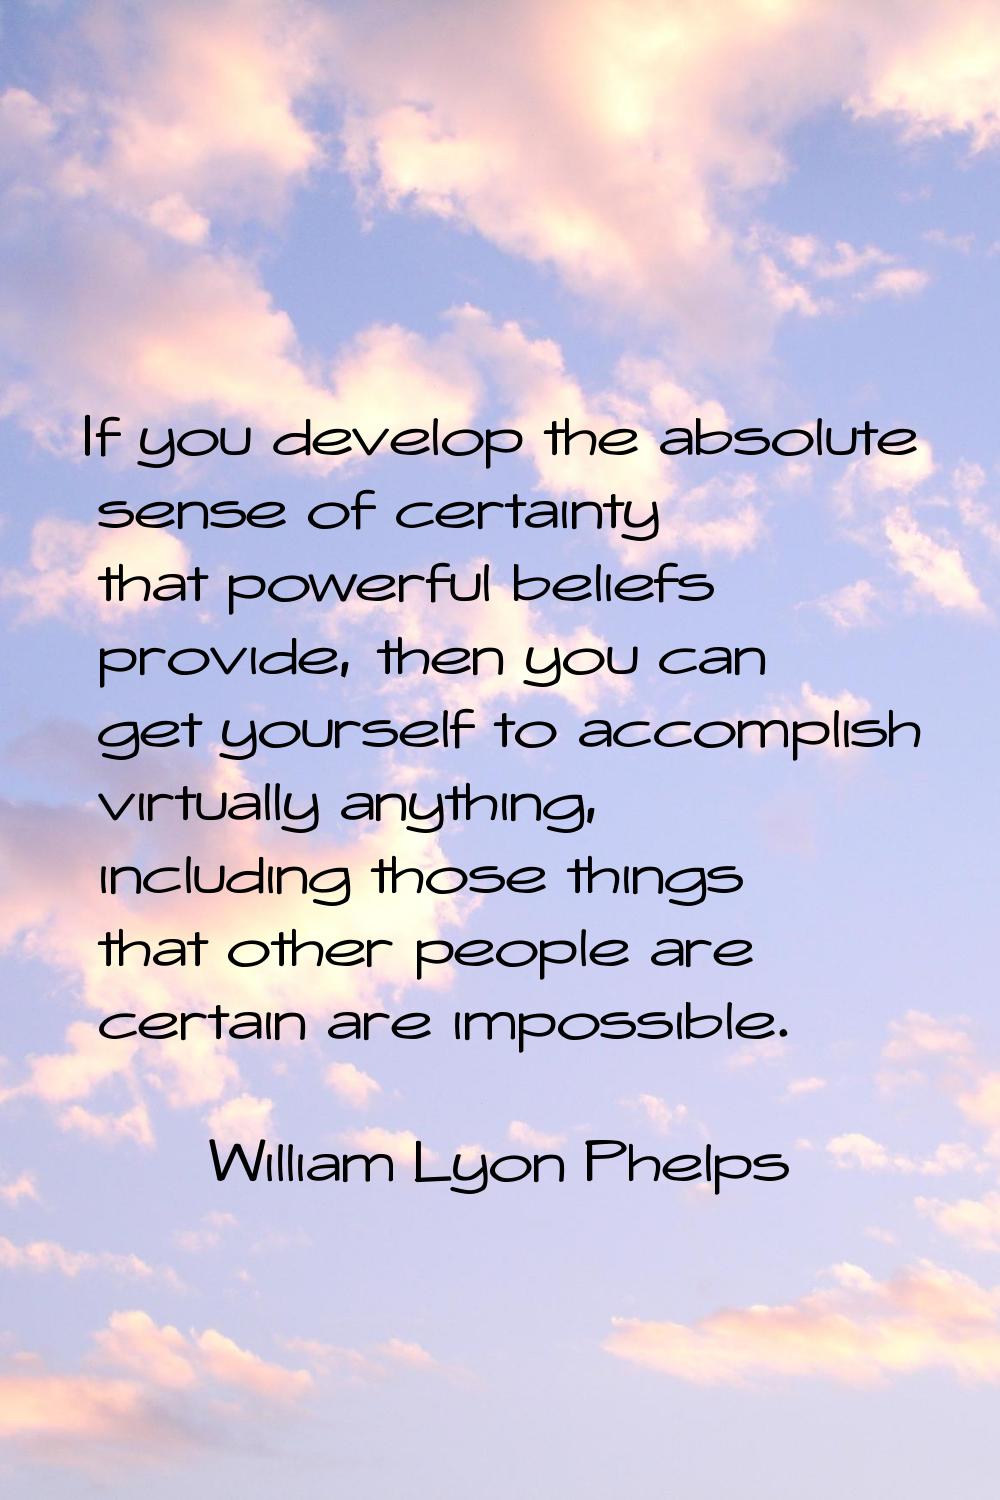 If you develop the absolute sense of certainty that powerful beliefs provide, then you can get your